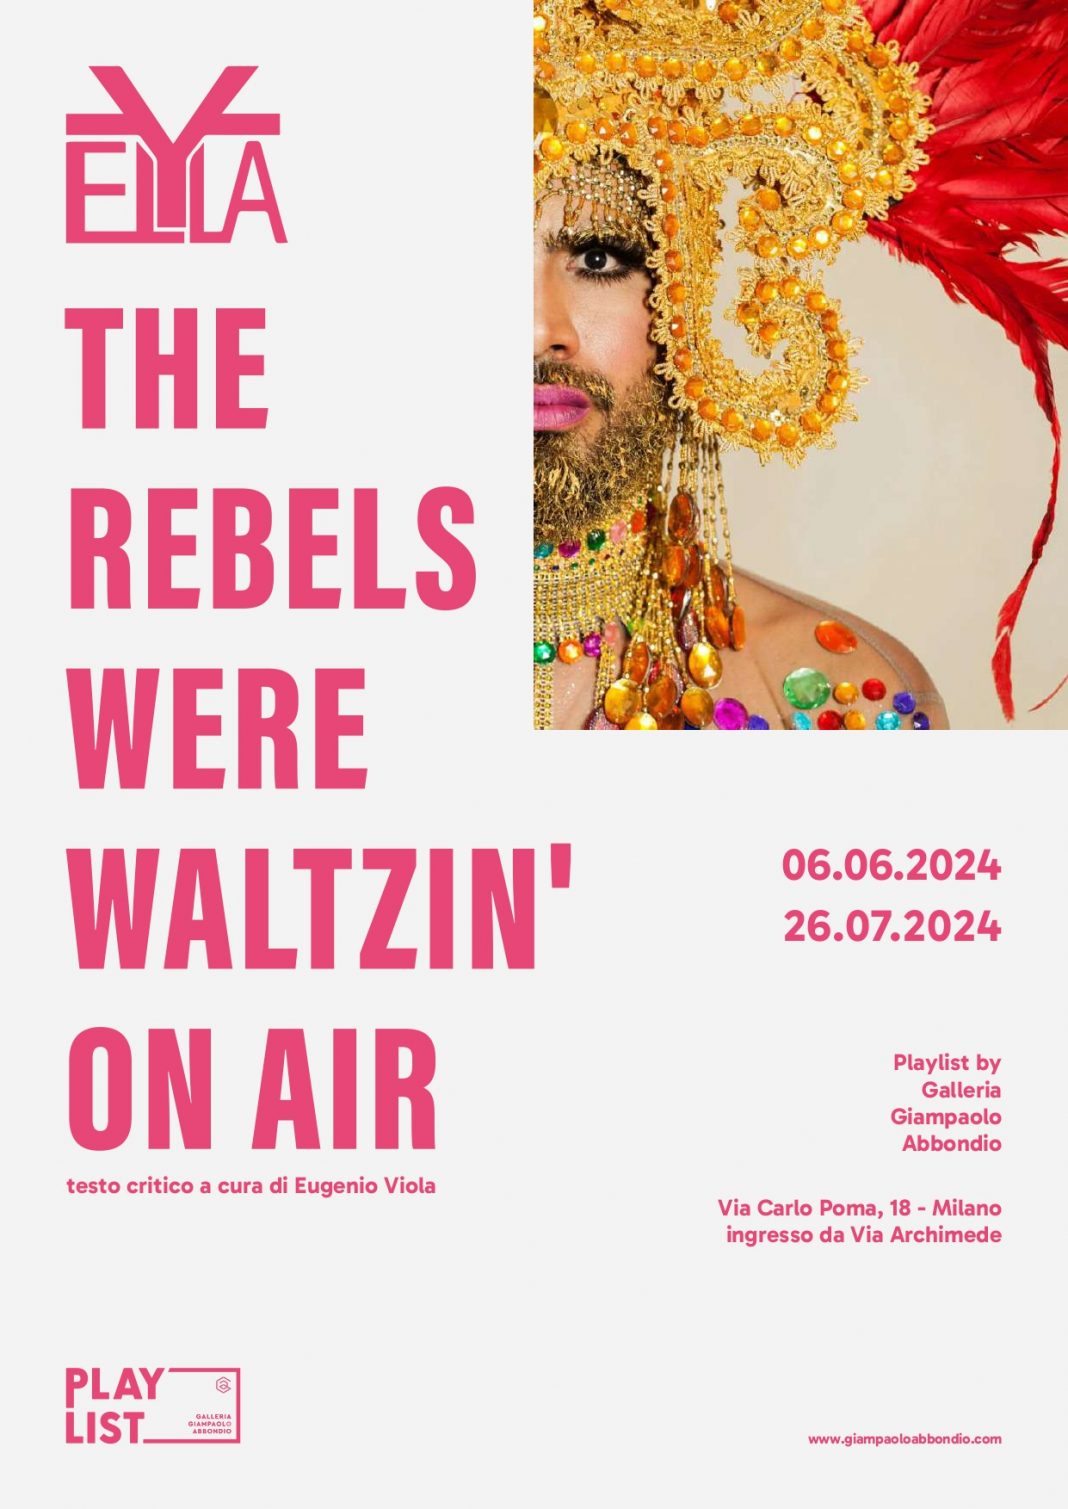 THE REBELS WERE WALTZIN’ ON AIR – ELYLAhttps://www.exibart.com/repository/media/formidable/11/img/1a8/elyla_a4_int_compressed_page-0001-1068x1509.jpg